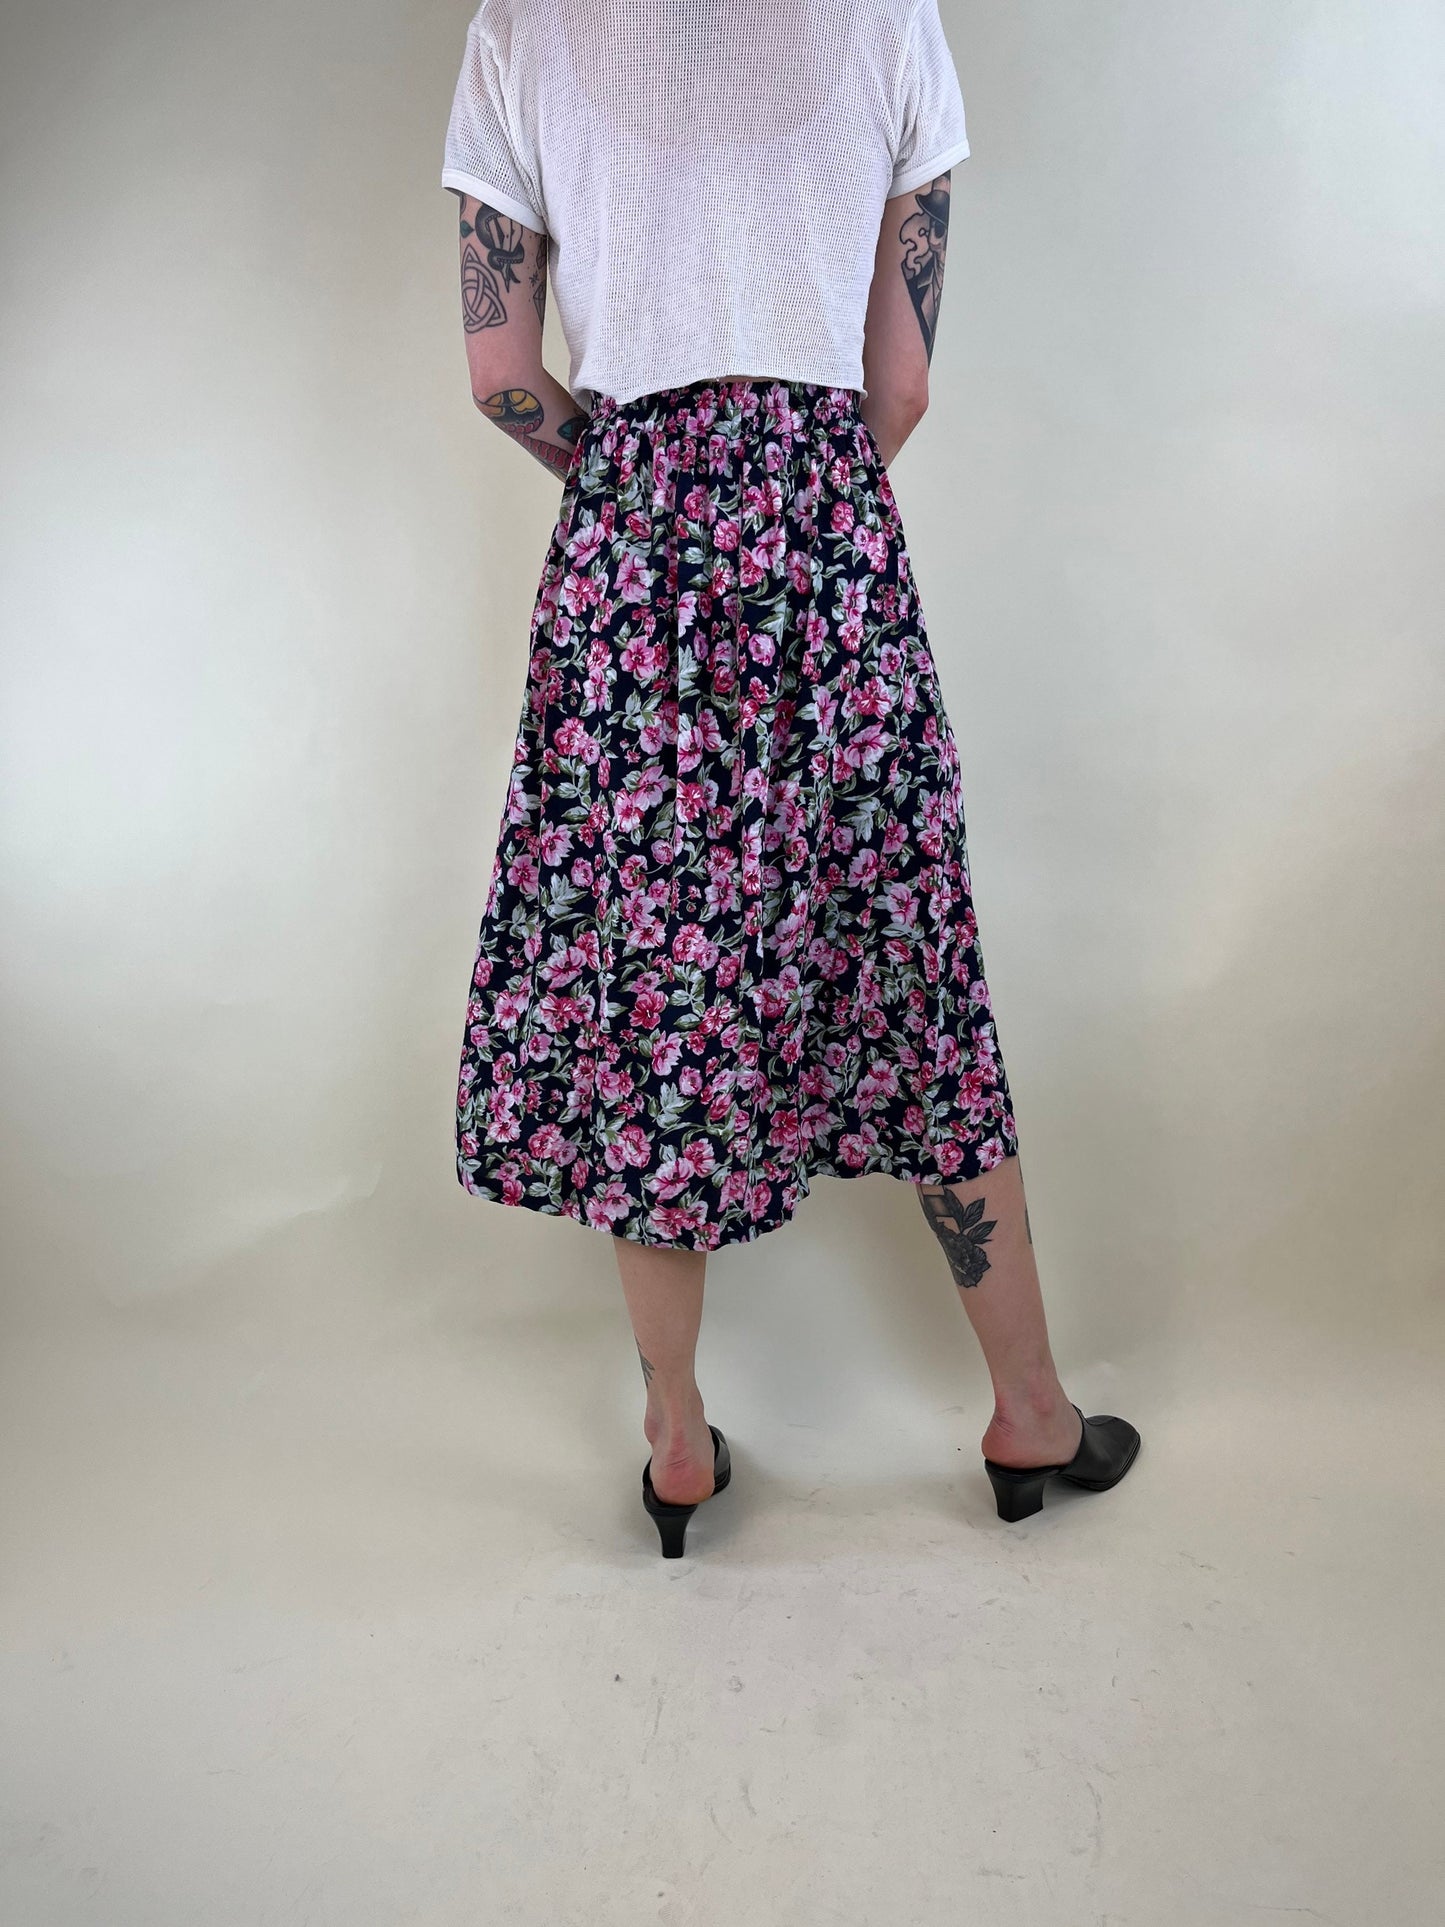 90s Floral Print Rayon Midi Skirt / Made in Canada / Small